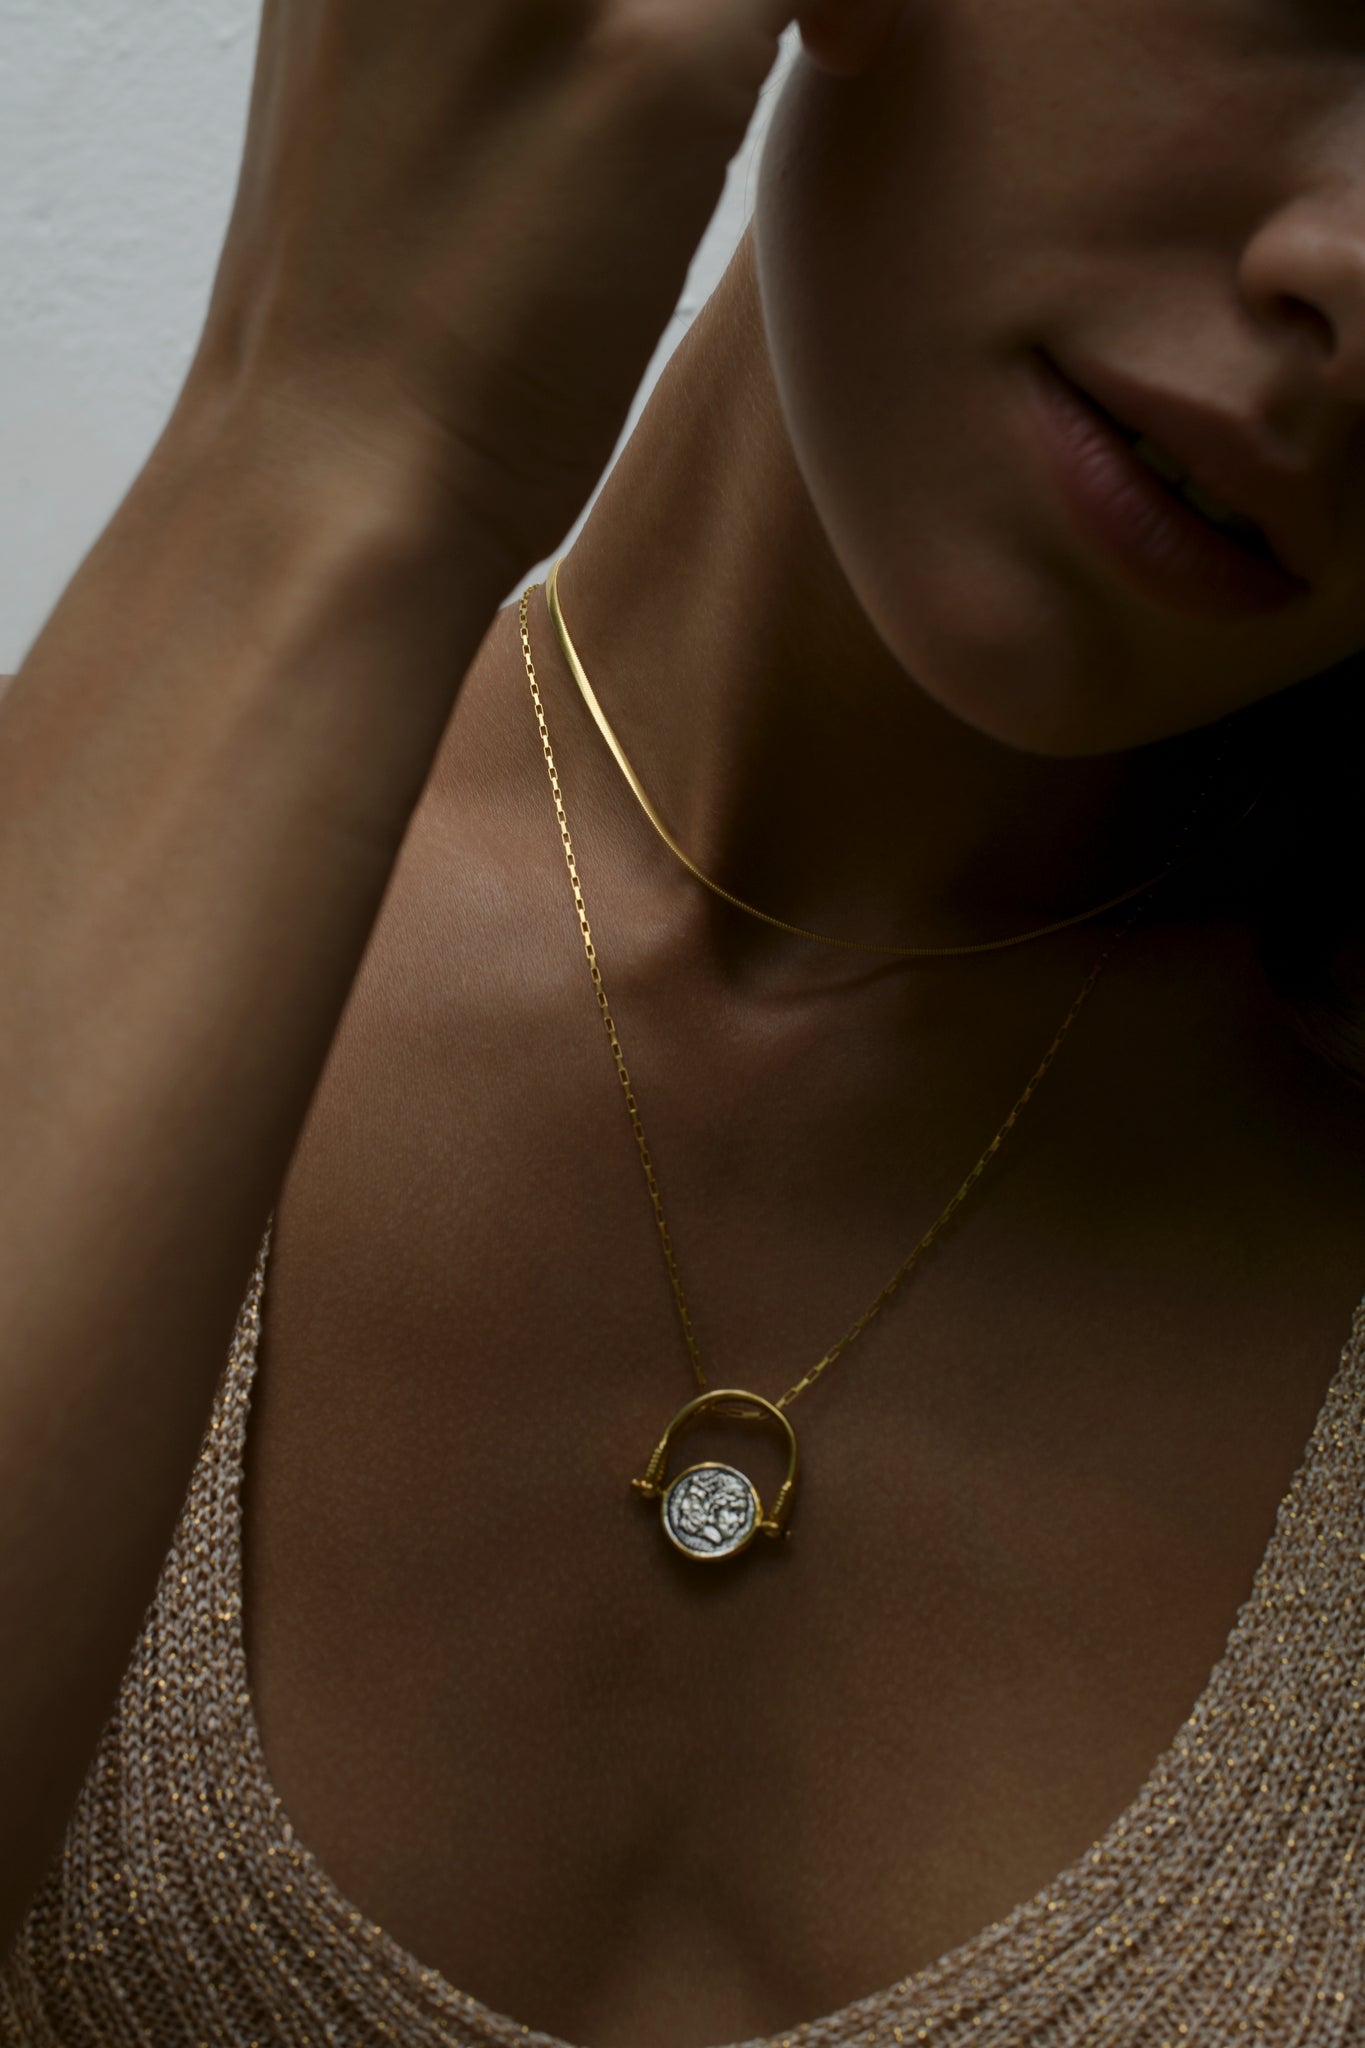 Janus Ring and Necklace